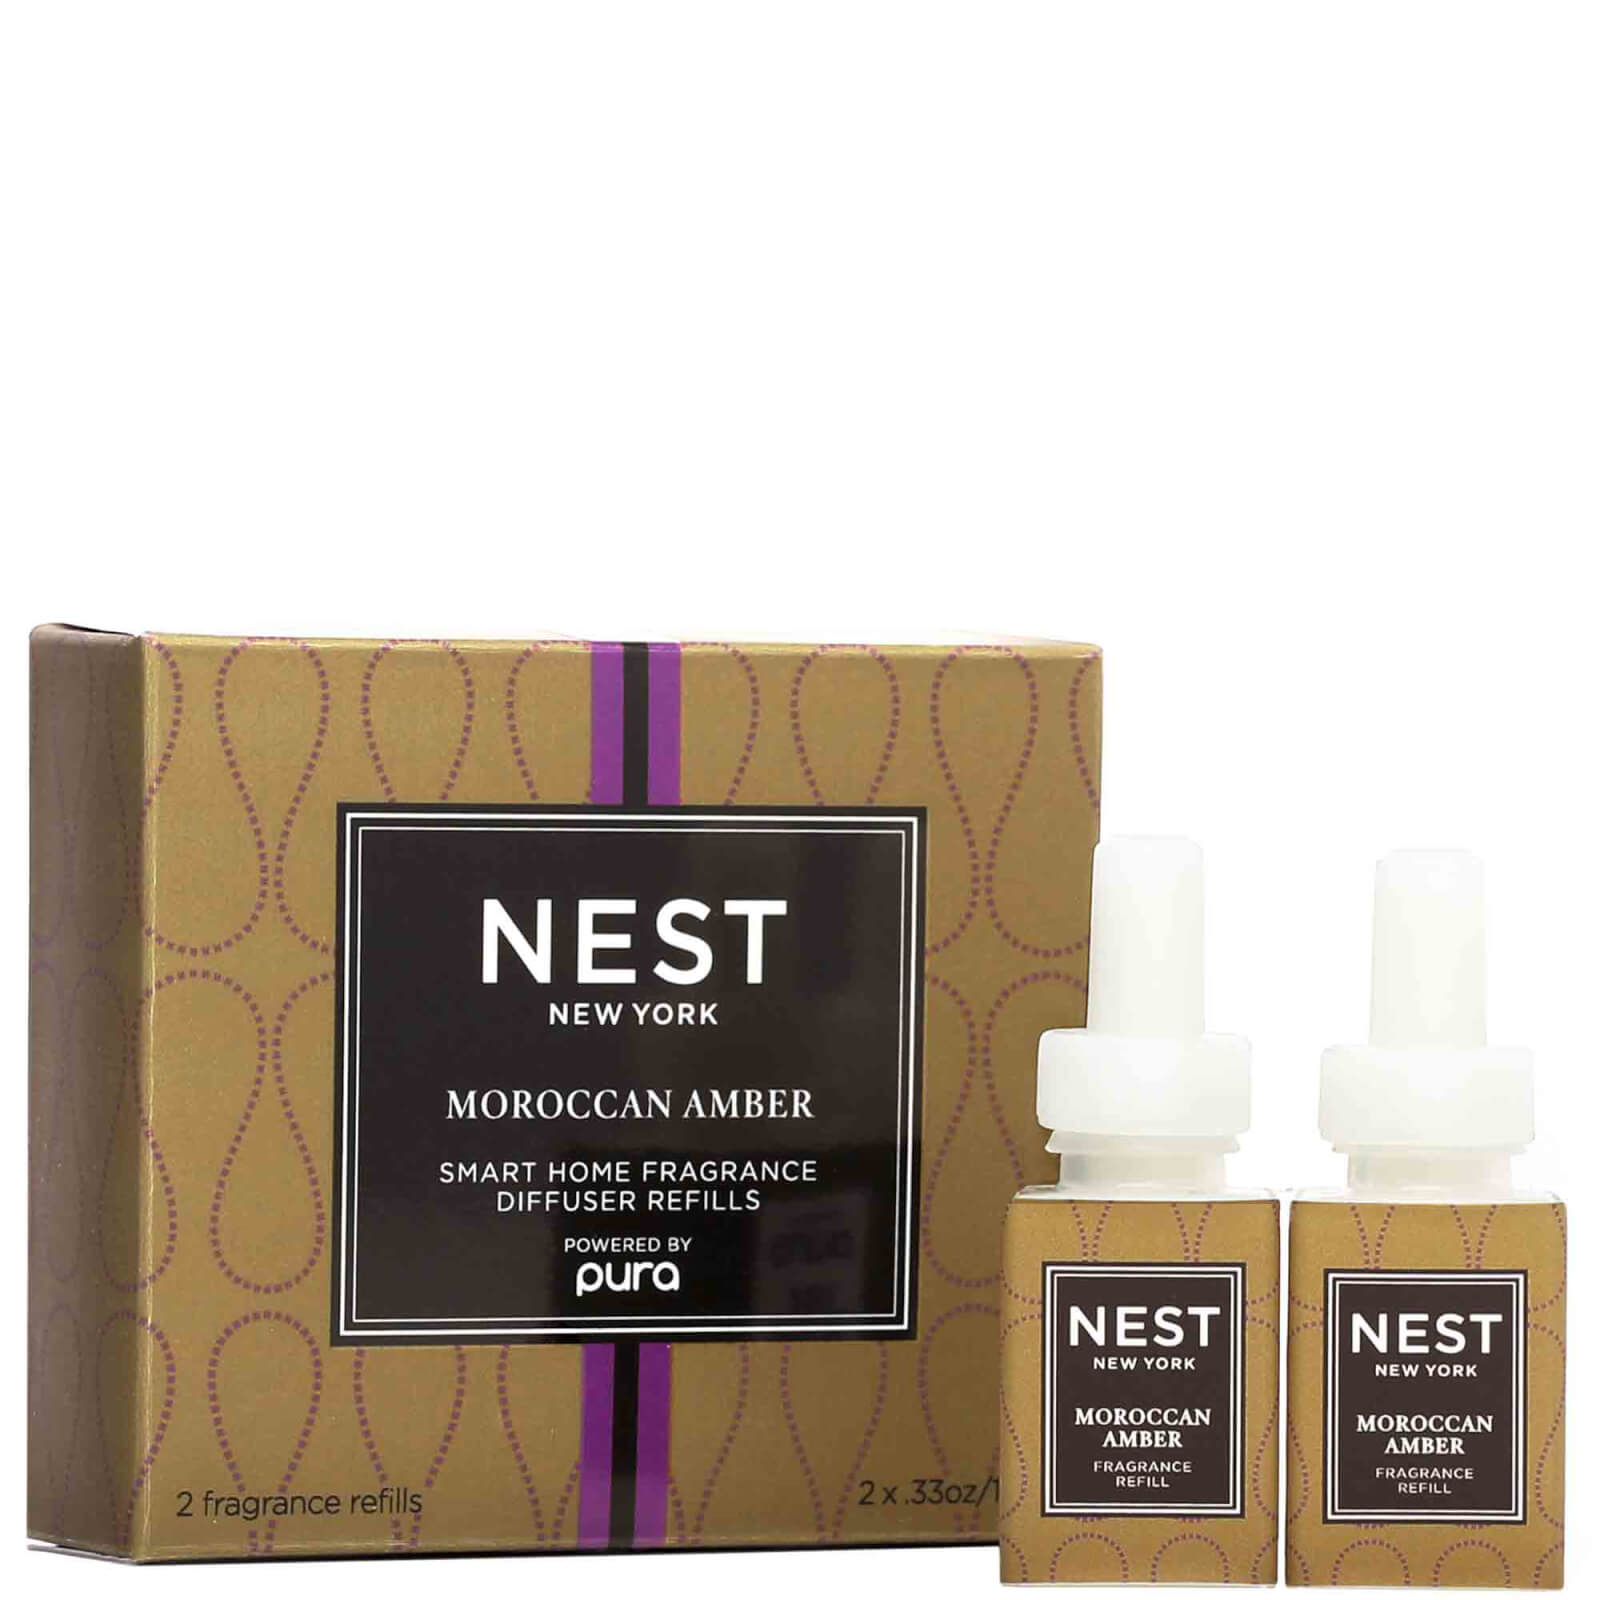 NEST NEW YORK MOROCCAN AMBER REFILL DUO FOR NEST X PURA SMART HOME FRAGRANCE DIFFUSER 10ML